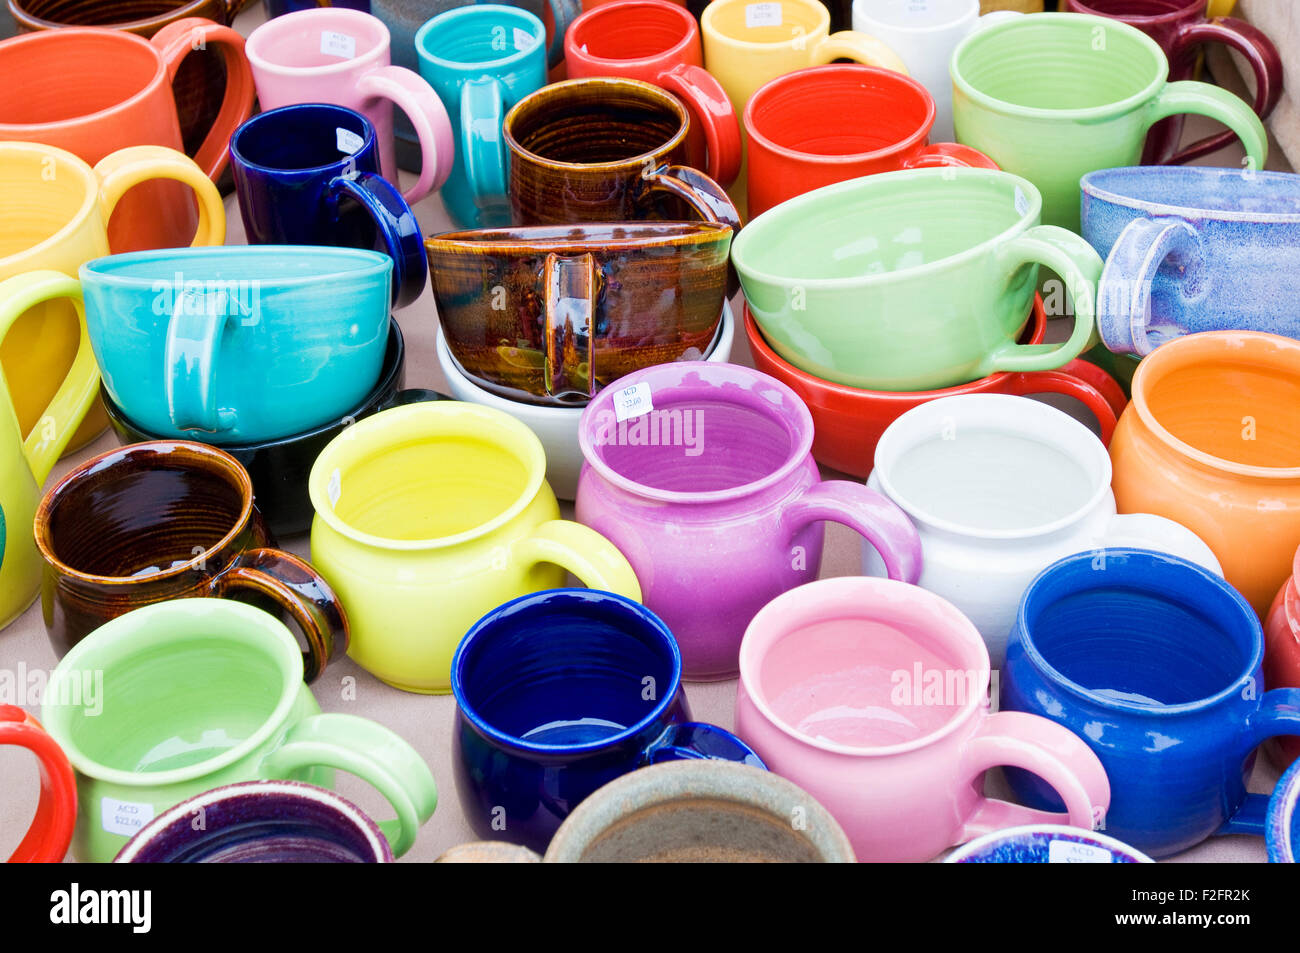 Colorful mugs on sale at a farmers and craft market Stock Photo